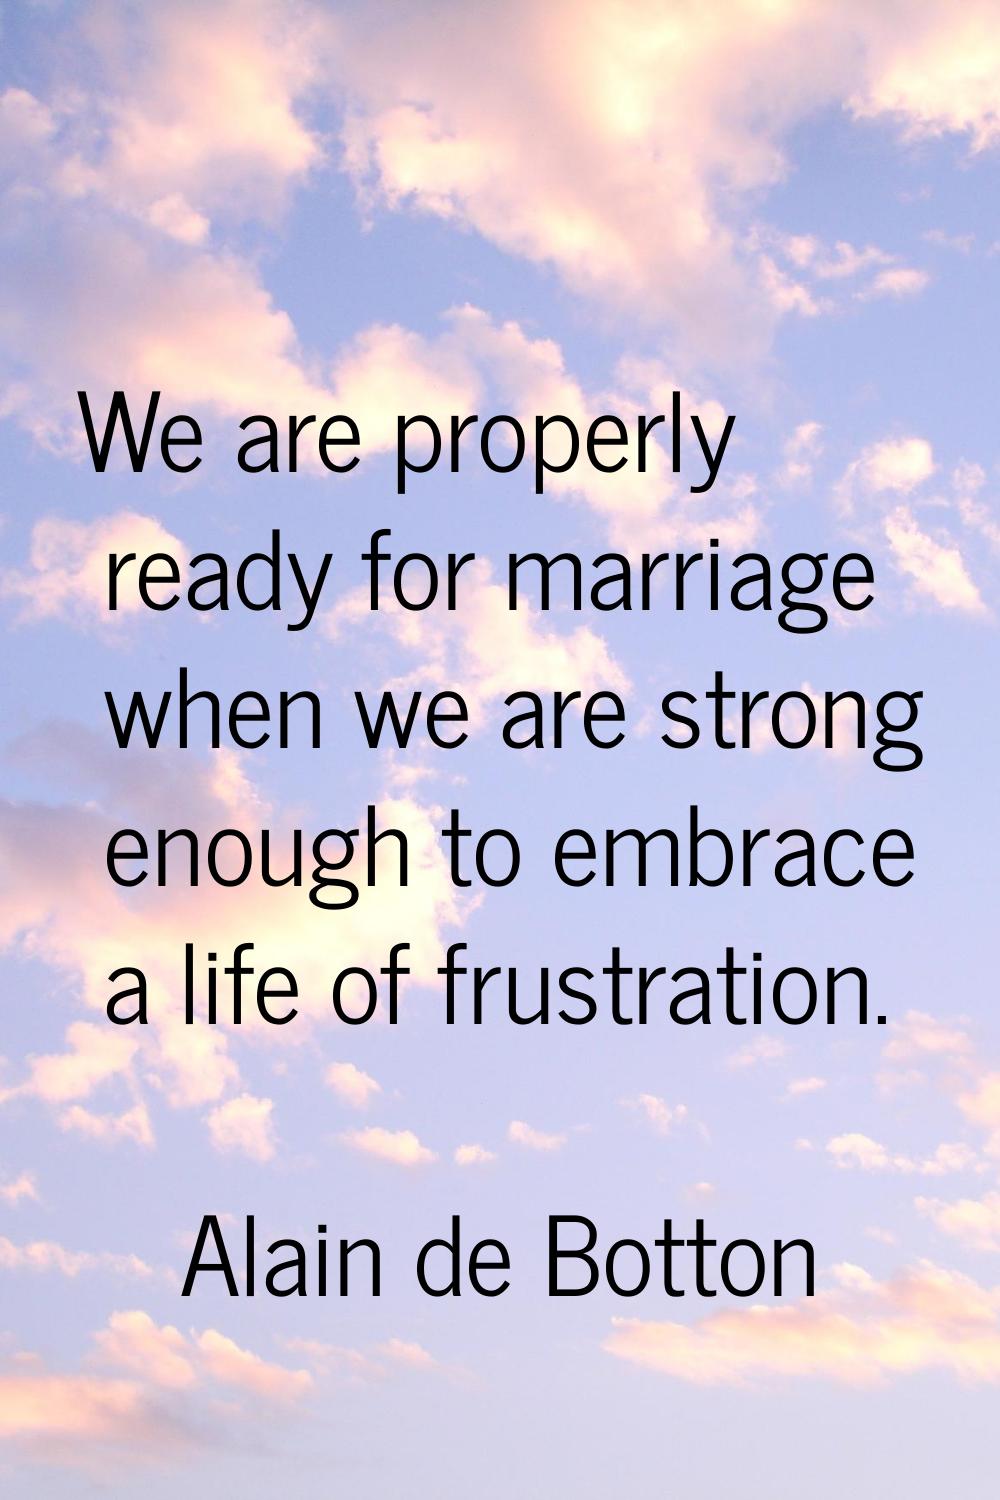 We are properly ready for marriage when we are strong enough to embrace a life of frustration.